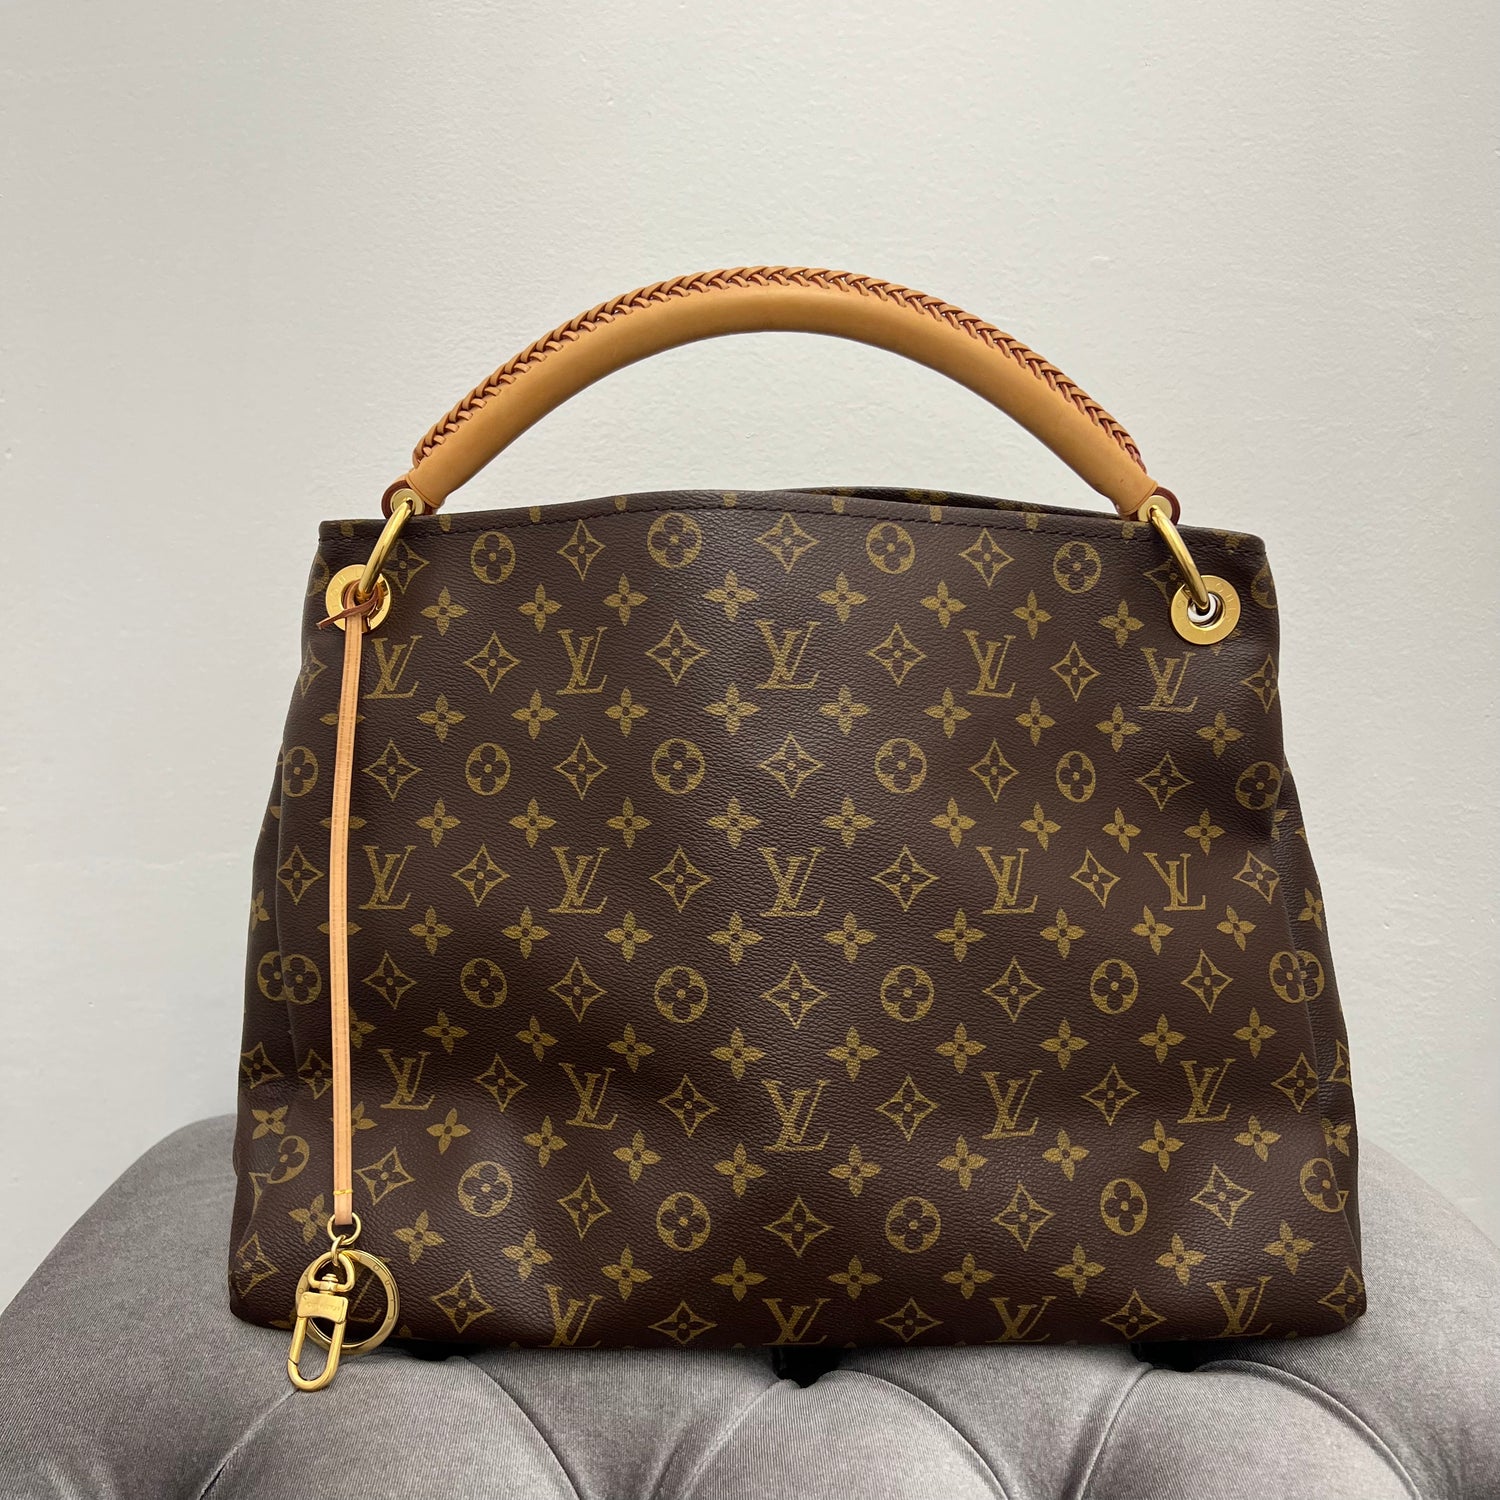 Louis Vuitton Pomme D'Amour Bedford Bag at Jill's Consignment